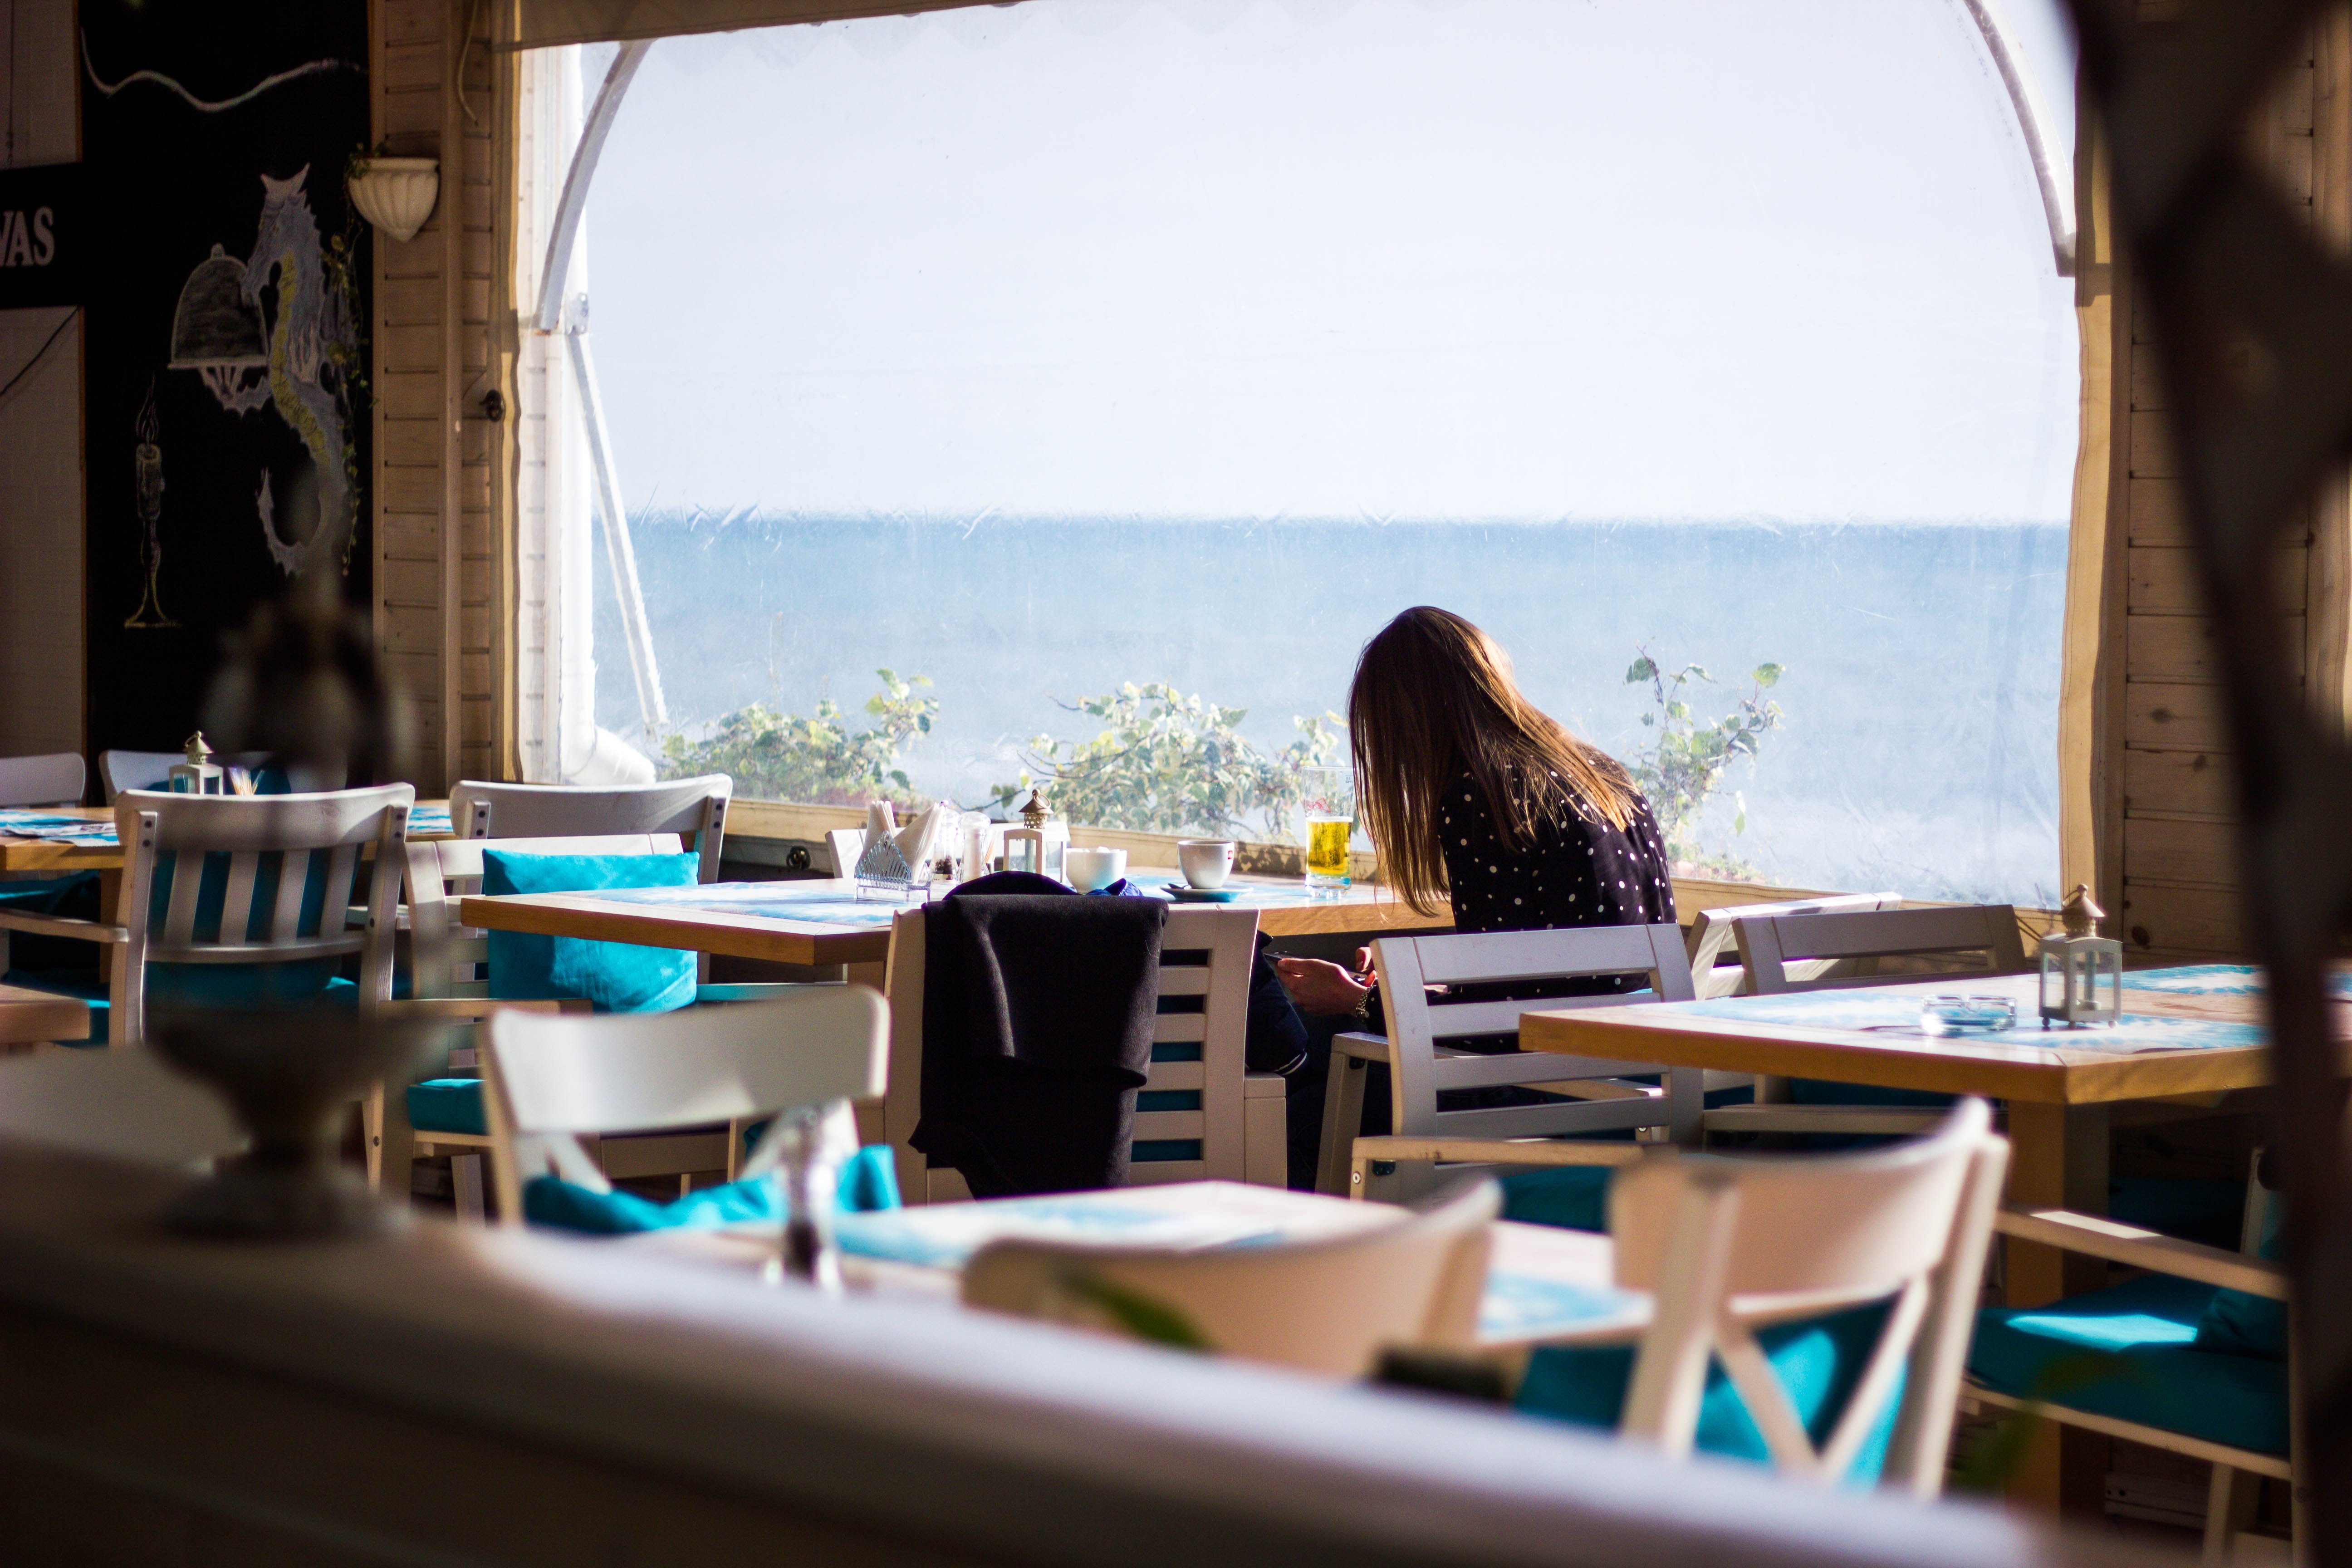 One day, Frank froze when he passed by a café & saw a girl sitting alone. | Source: Unsplash